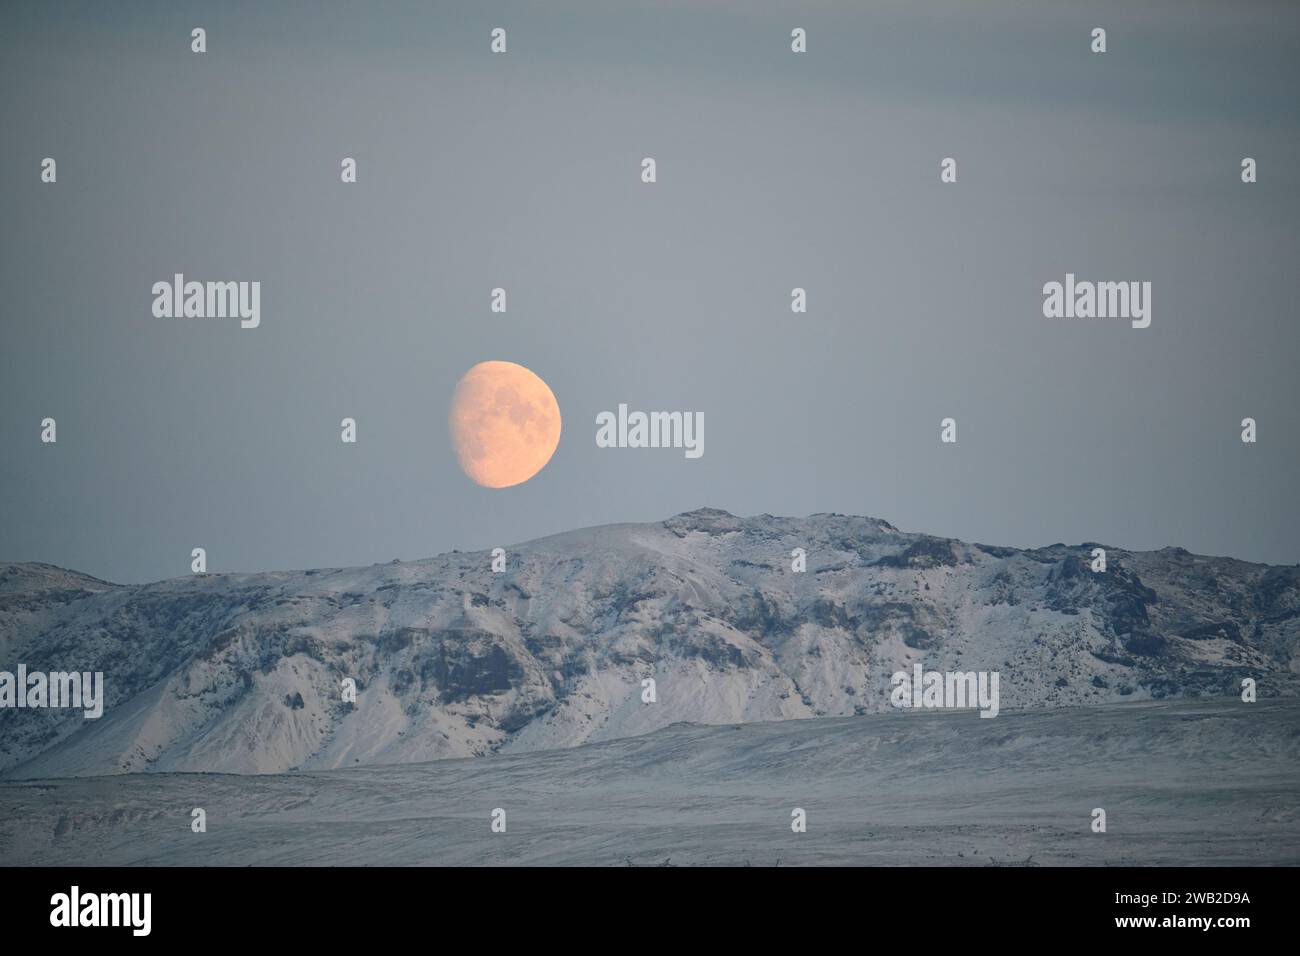 Moon shining over snowy mountains in winter Stock Photo